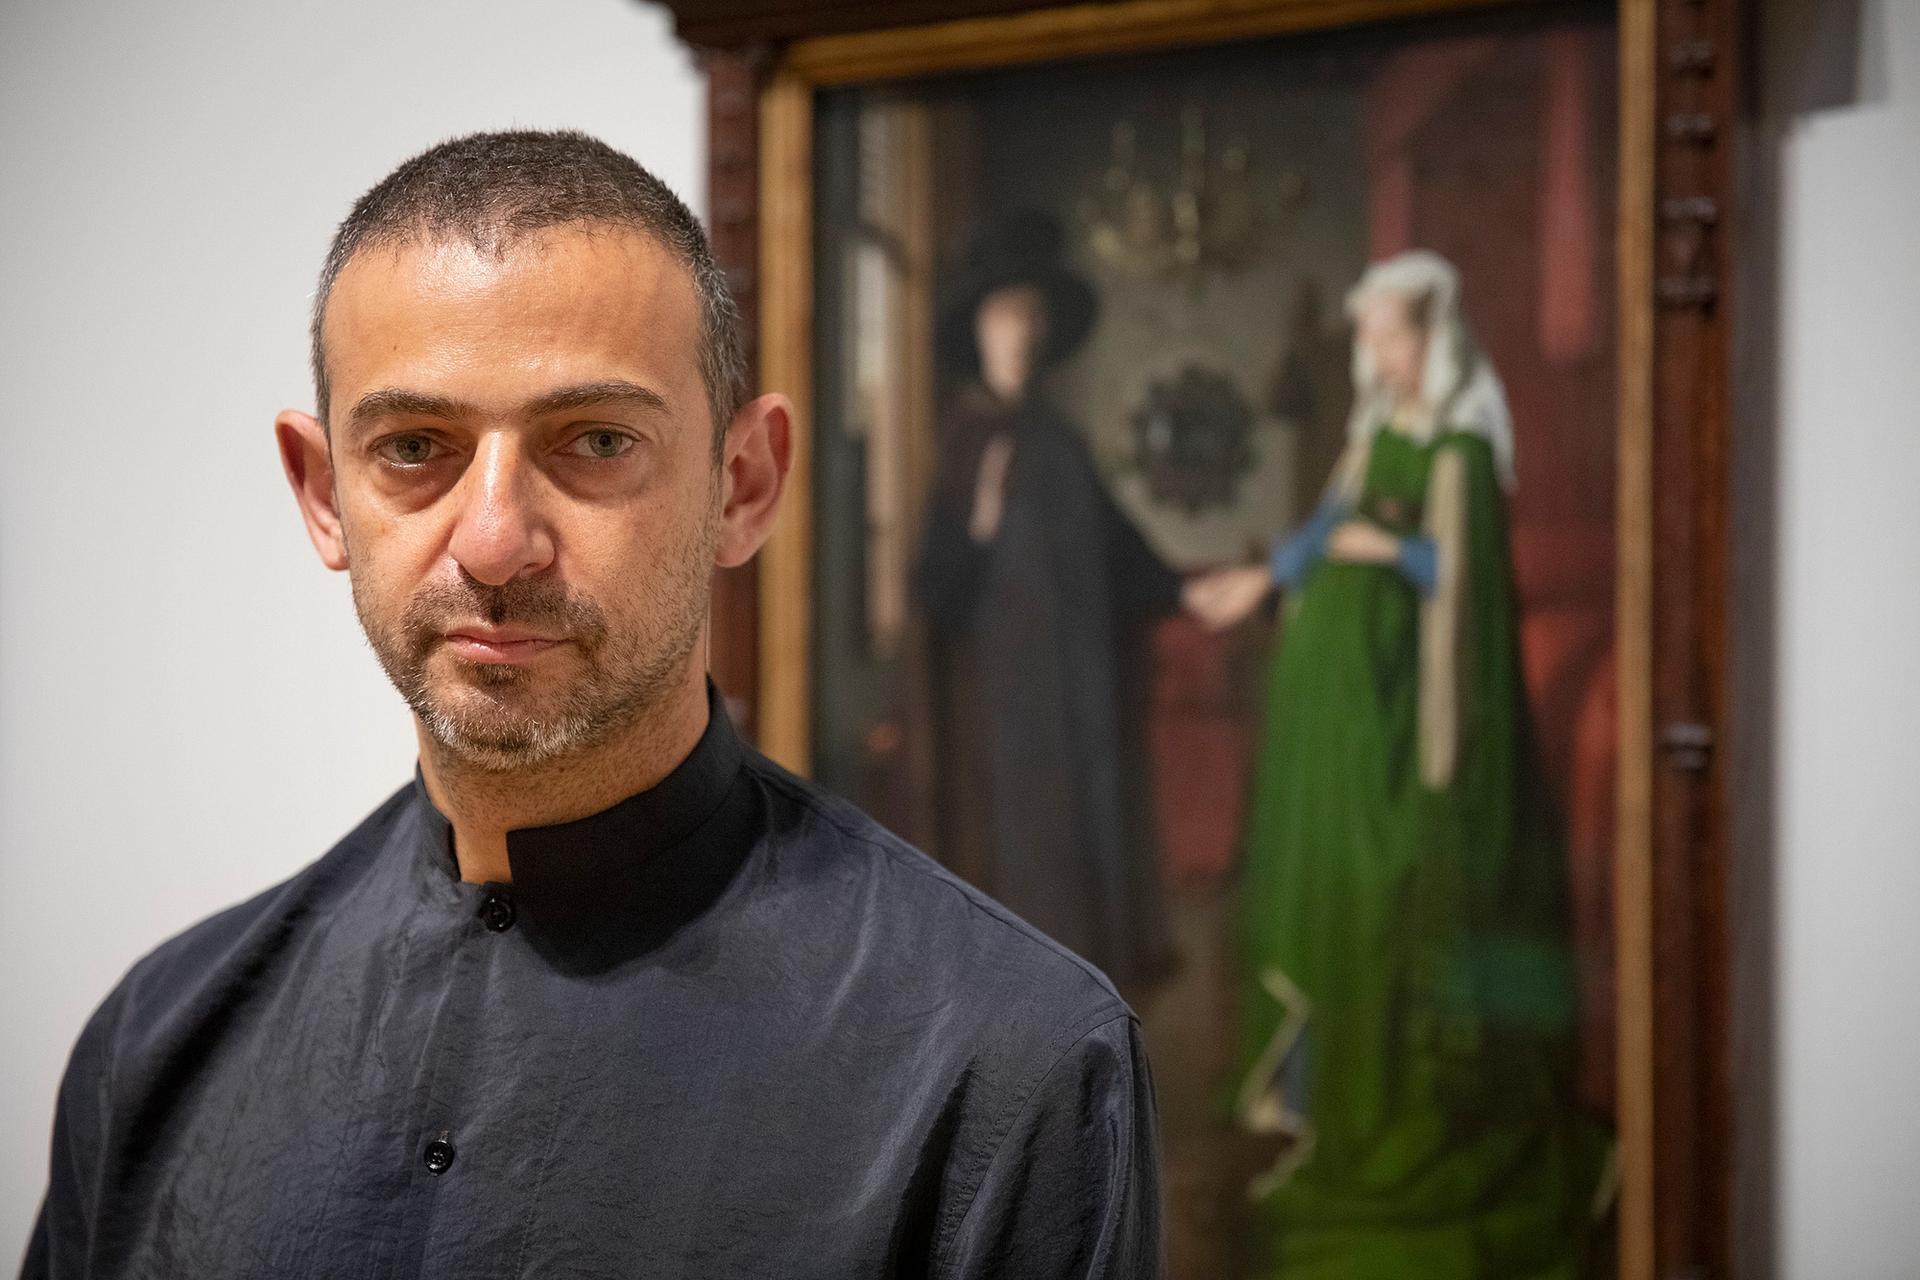 Ali Cherri in front of Van Eyck’s The Arnolfini Portrait at the National Gallery. © Photo: The National Gallery, London